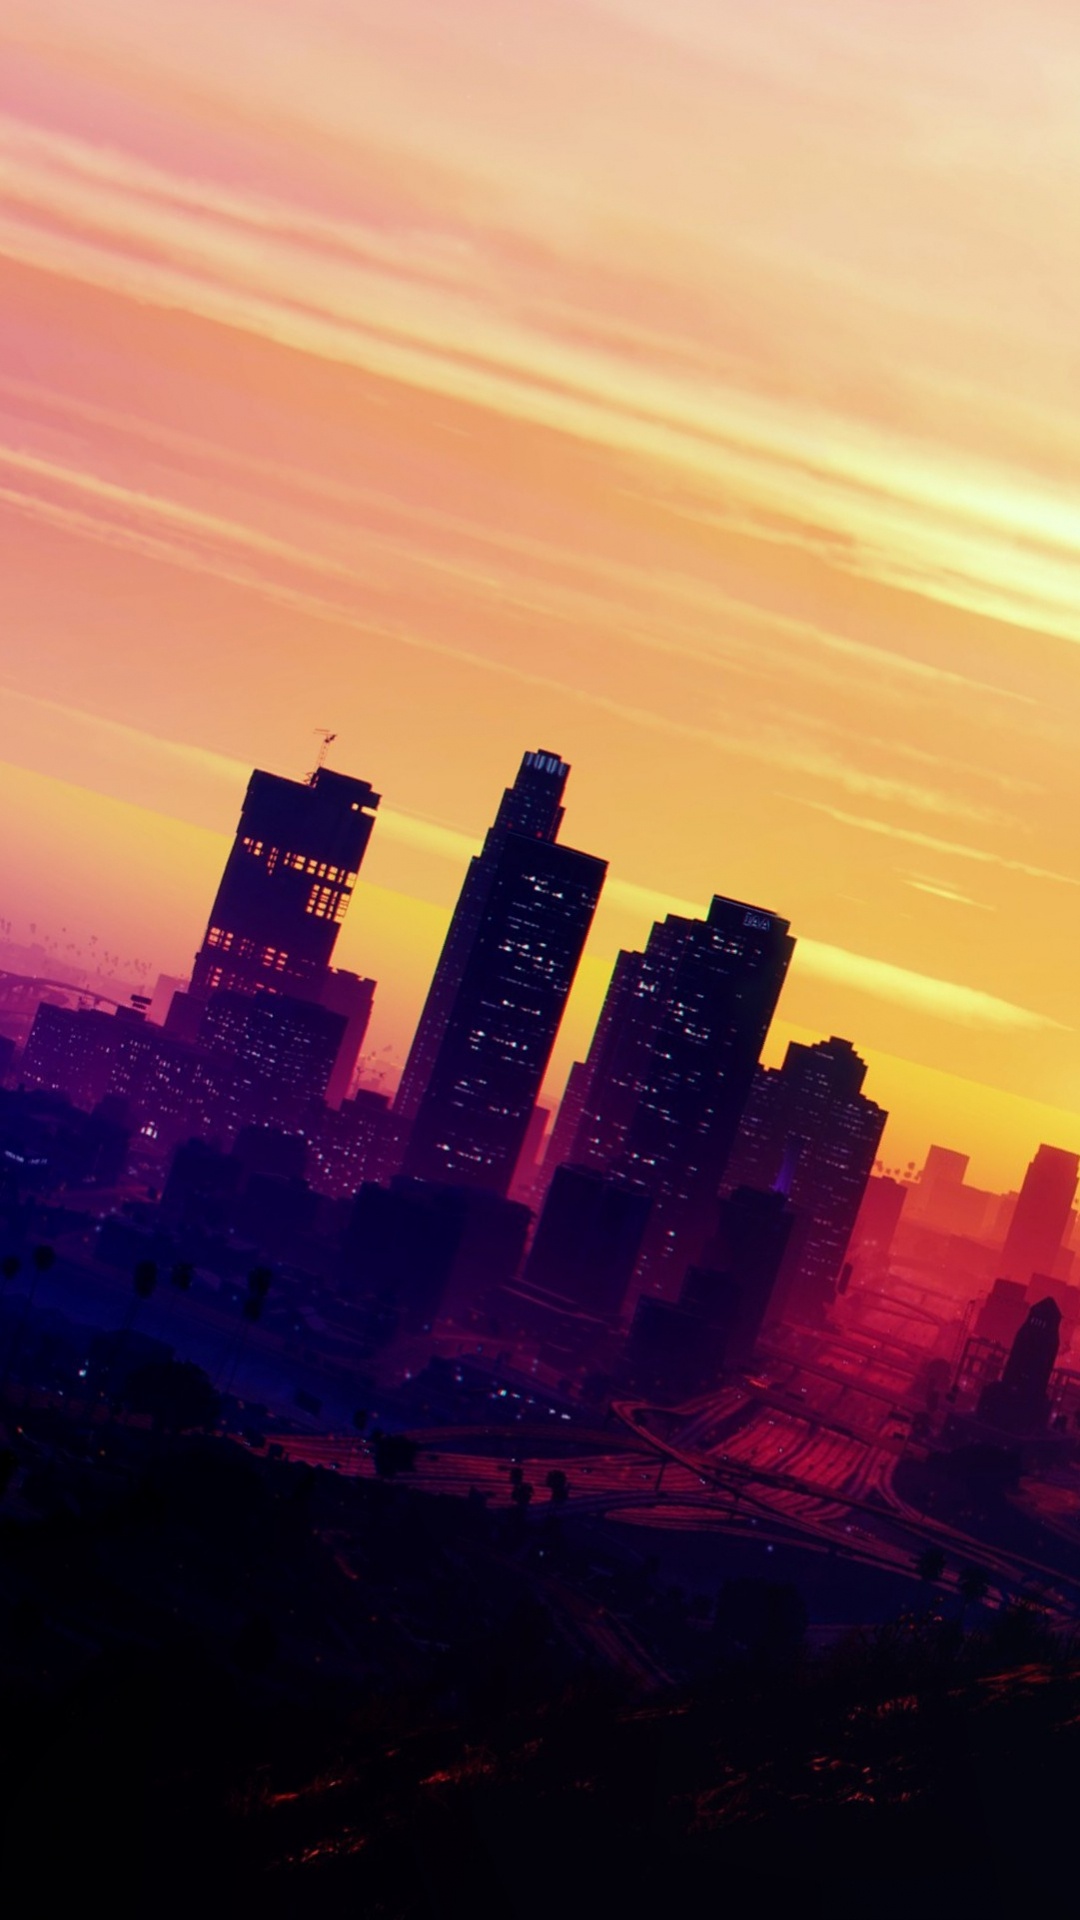 Grand Theft Auto v, Grand Theft Auto San Andreas, Horizon, Afterglow, Sunset. Wallpaper in 1080x1920 Resolution